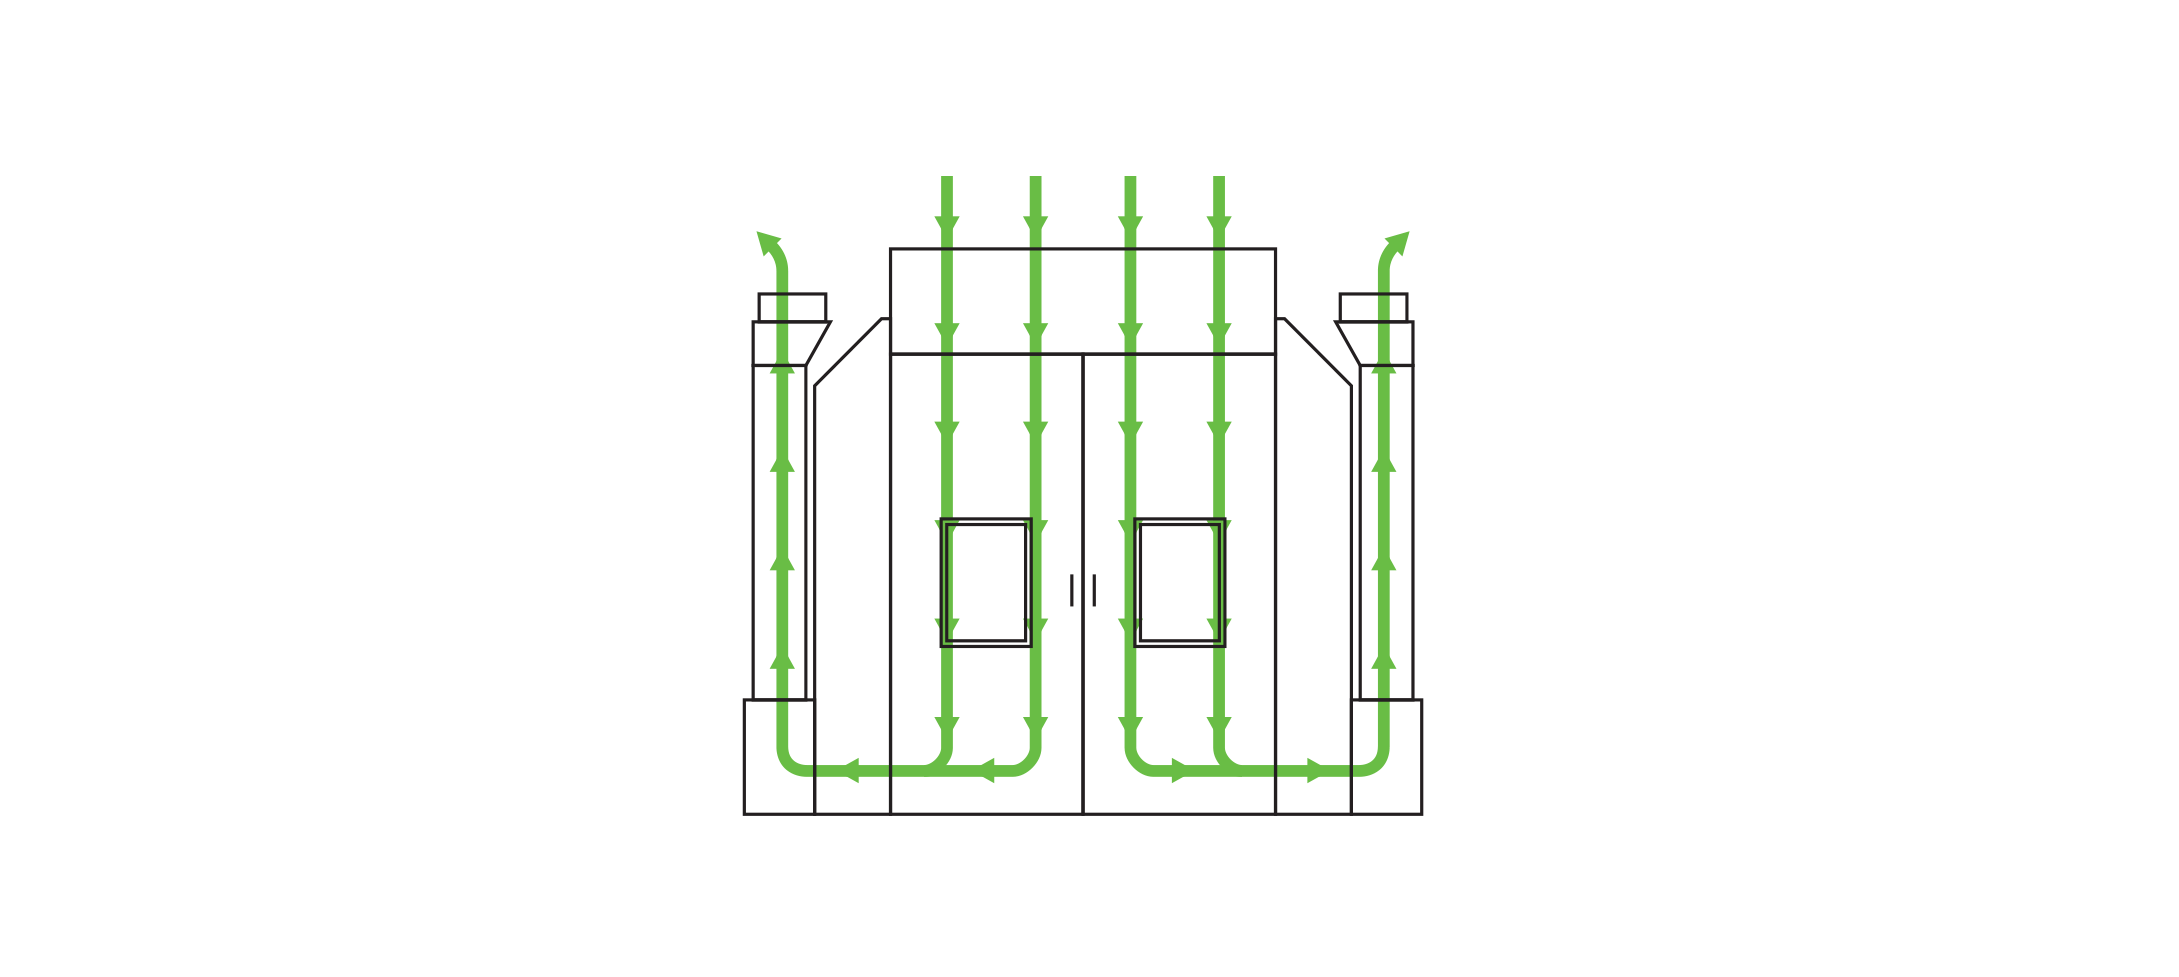 Air Flow Diagram for Non Heated Side Down Draft